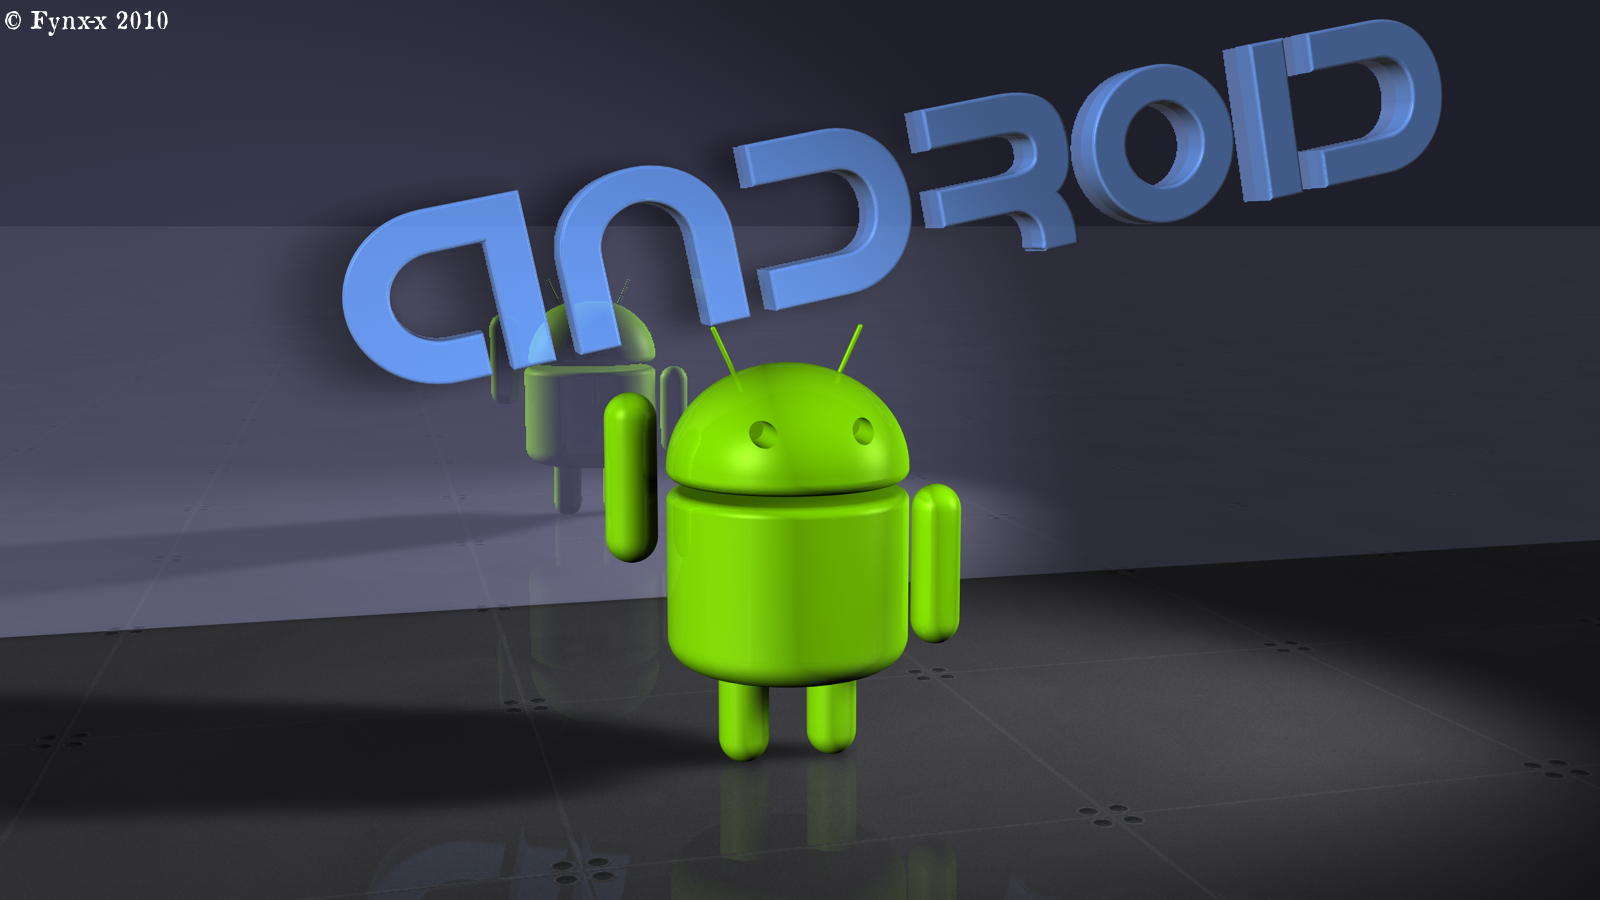 android wallpaper location   DriverLayer Search Engine